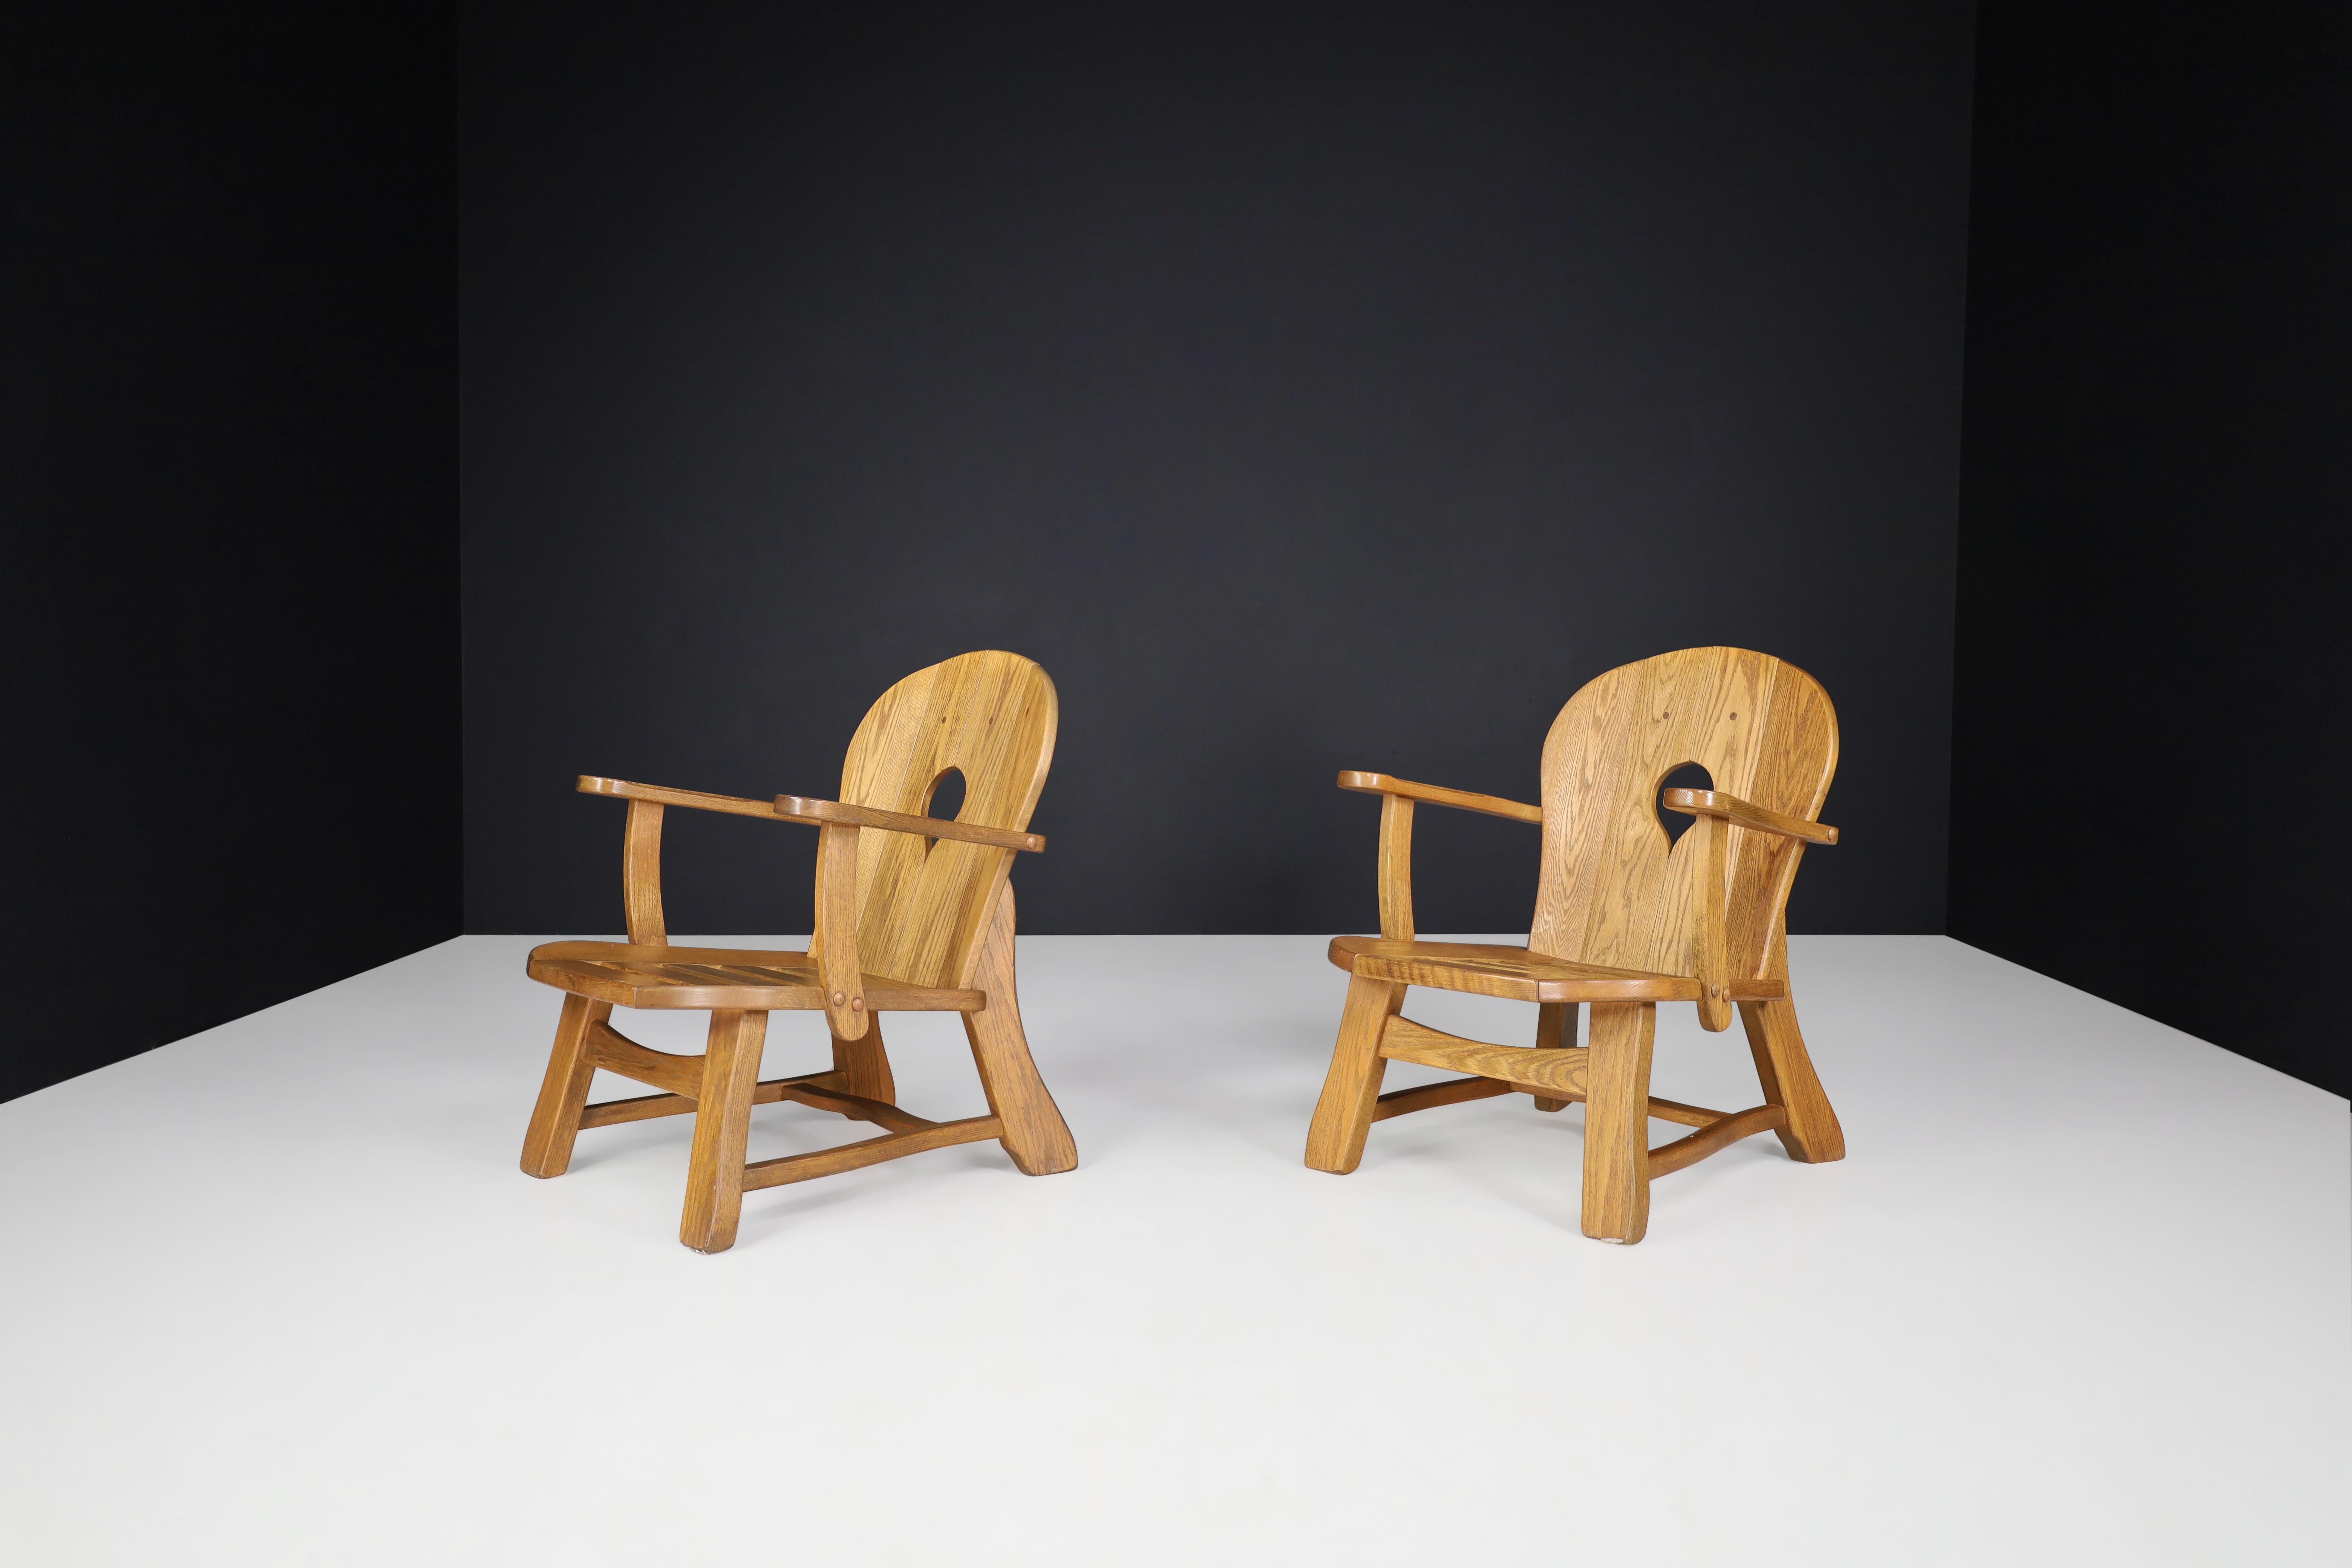 20th Century Sculptural Lounge Chairs in Oak, France, 1960s For Sale